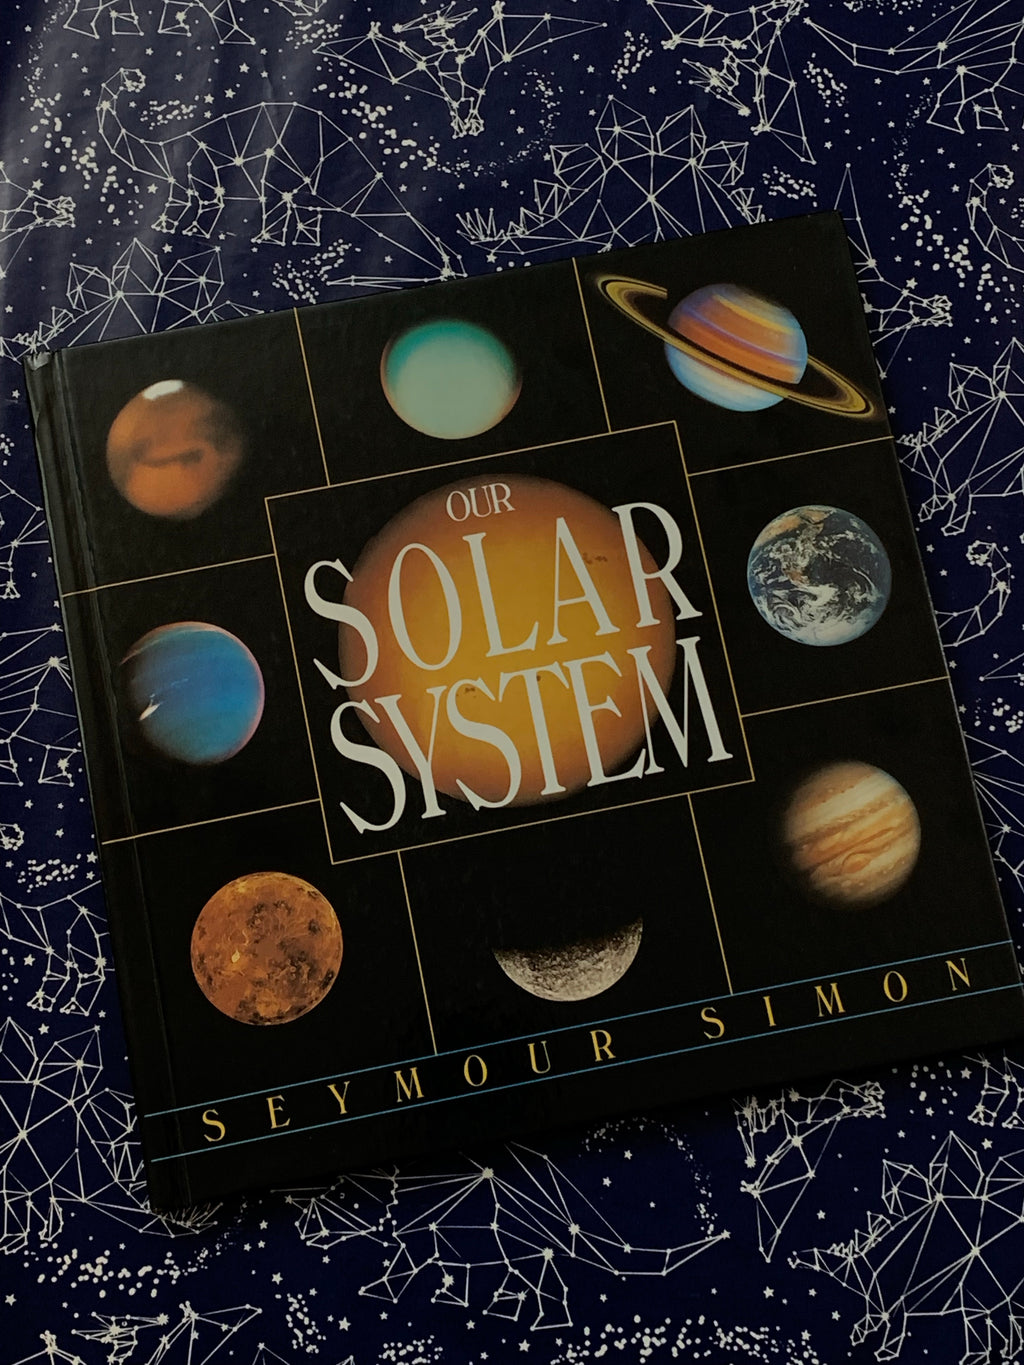 Our Solar System- By Seymour Simon